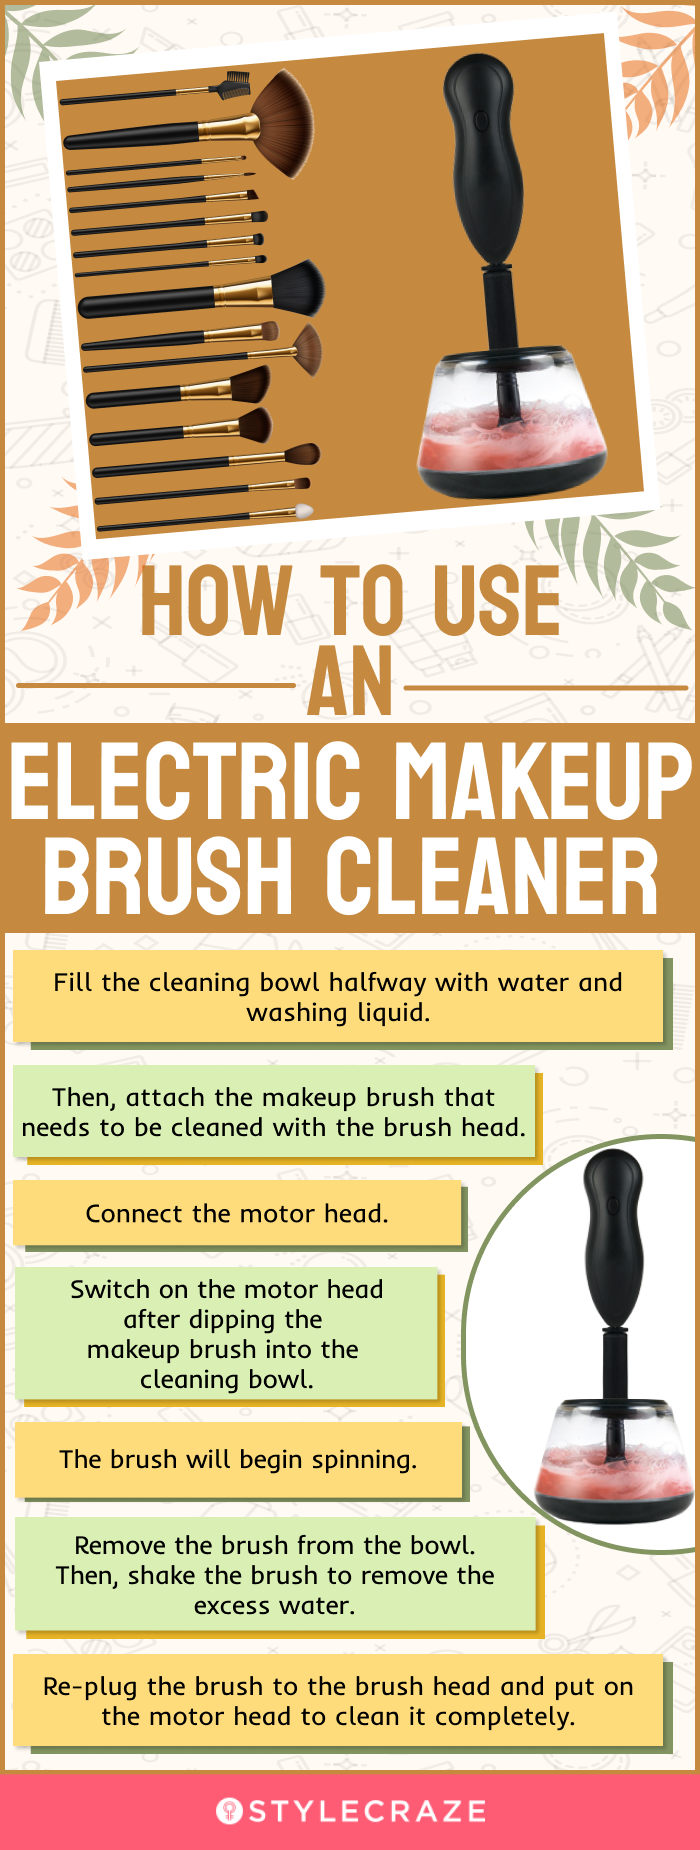 How To Use An Electric Makeup Brush Cleaner